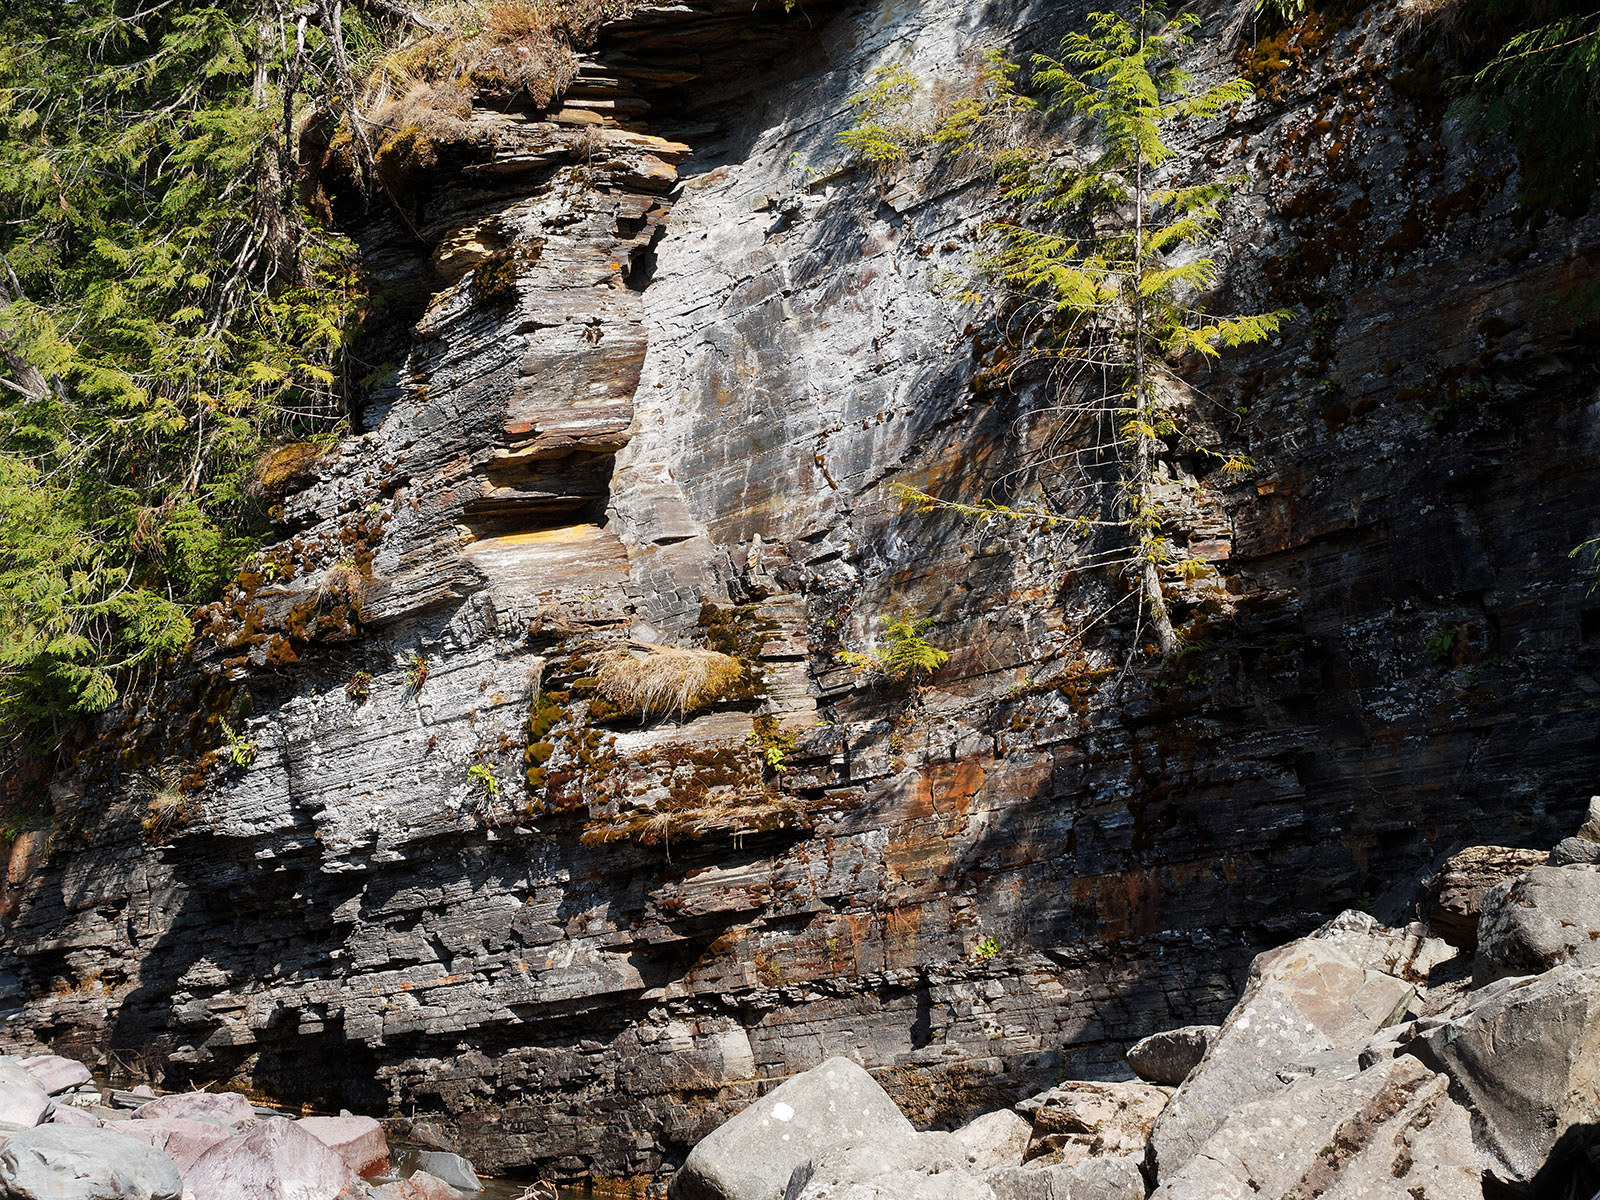 The Prichard formation along with the Altyn formation are the two oldest formations in Glacier National Park.  Prichard formation is only found on the West side of the park.  It is composed of thin layers of black argillite and siltite that were deposited in deep ocean waters.  Radioisotope labelling studies date it at 1.7 to 1.3 billion years.  Argillite is metamorphic rock of sedimentary origin derived from recrystallized clay materials.  Siltite is derived from very fine mineral grain deposits.  All were formed in low-oxygen conditions.  The rust-colored material on the weathered surface is from iron sulfide minerals being oxidized as it leaches from the formation and interacting with current atmosphere.